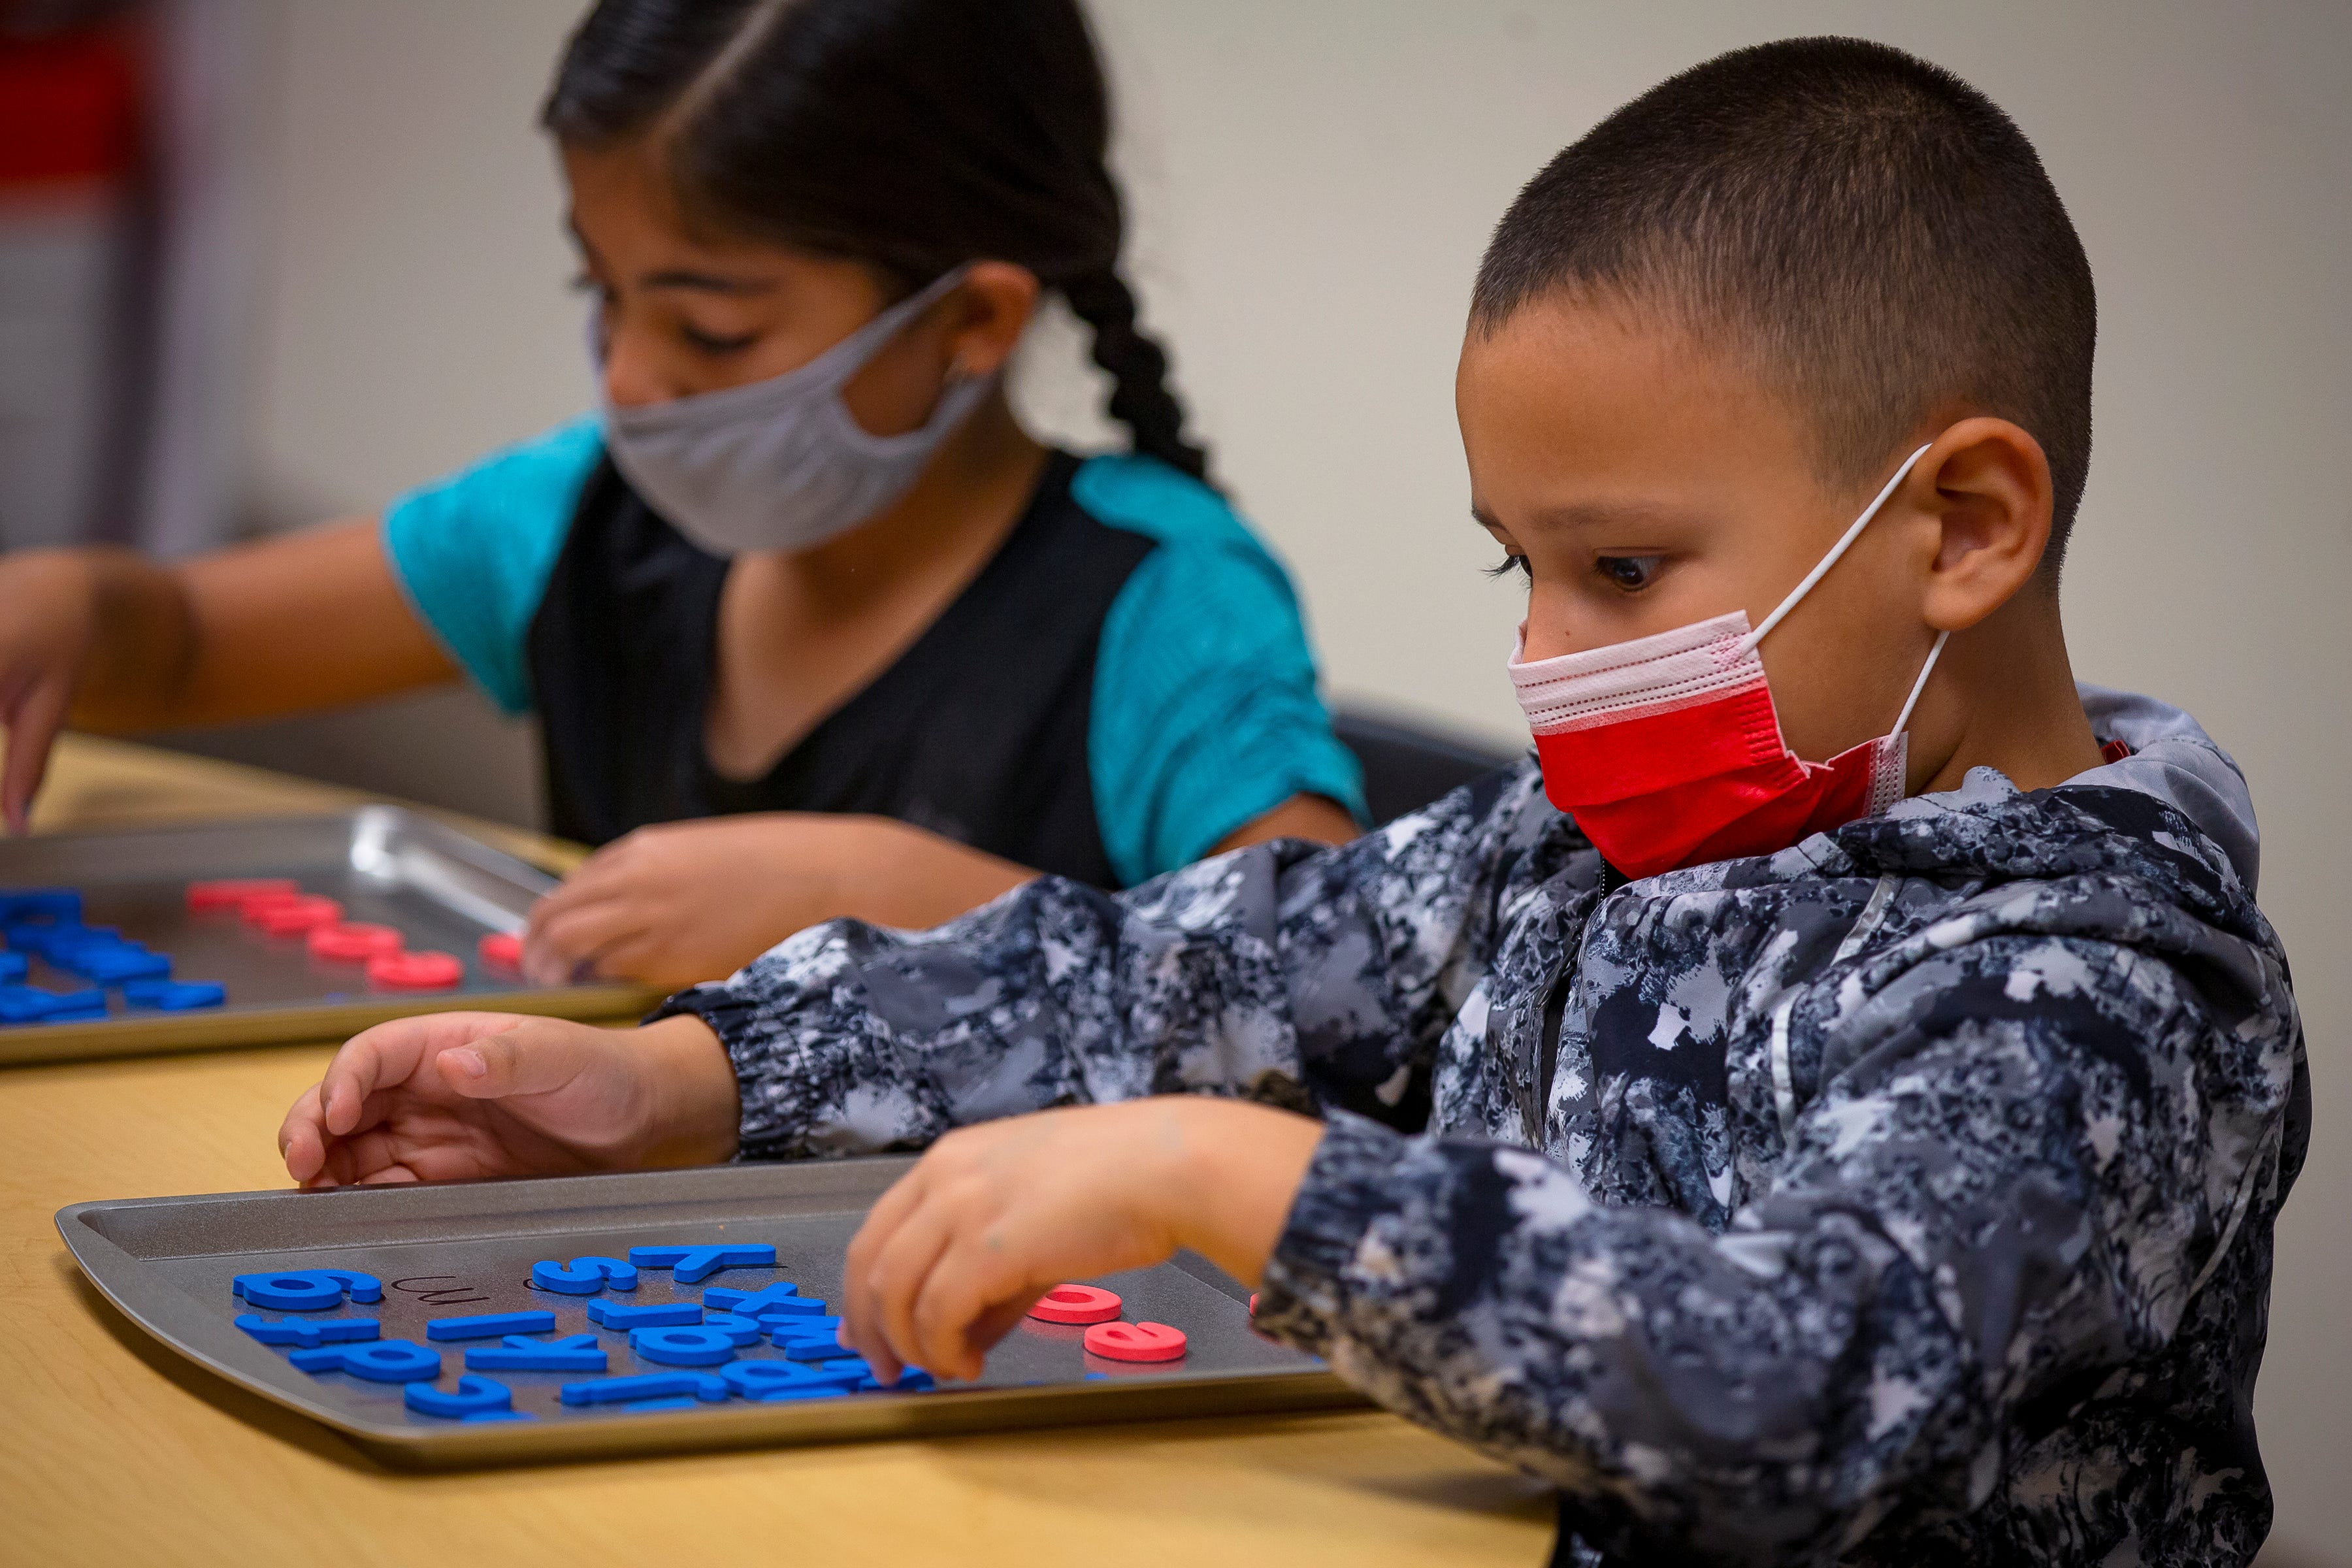 First-grade students participate in a phonics activity with magnetic letters during an intensive reading class at Freedom Elementary School in Buckeye, Arizona, on Nov. 16, 2021.